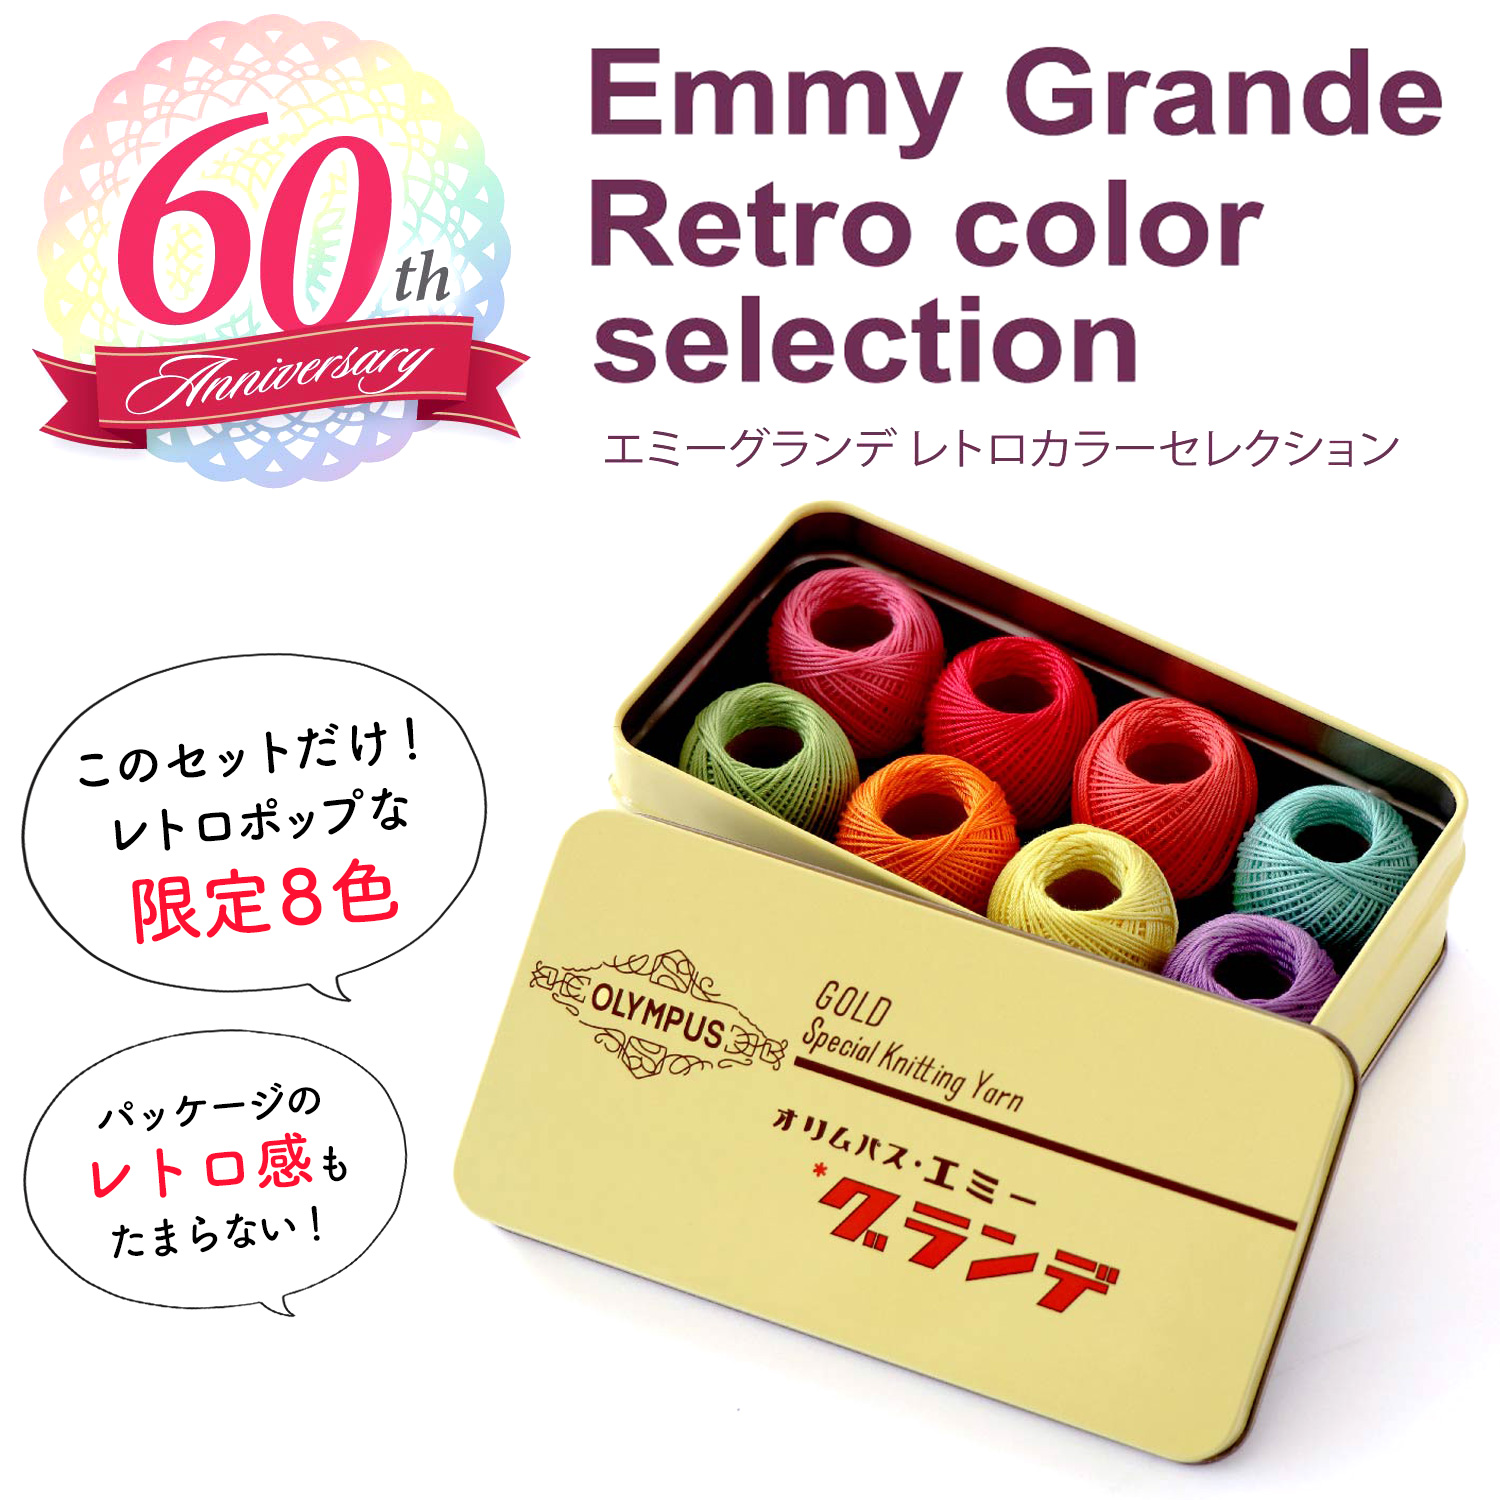 OLY07945 Olympus Emmy Grande Retro color collection（set）